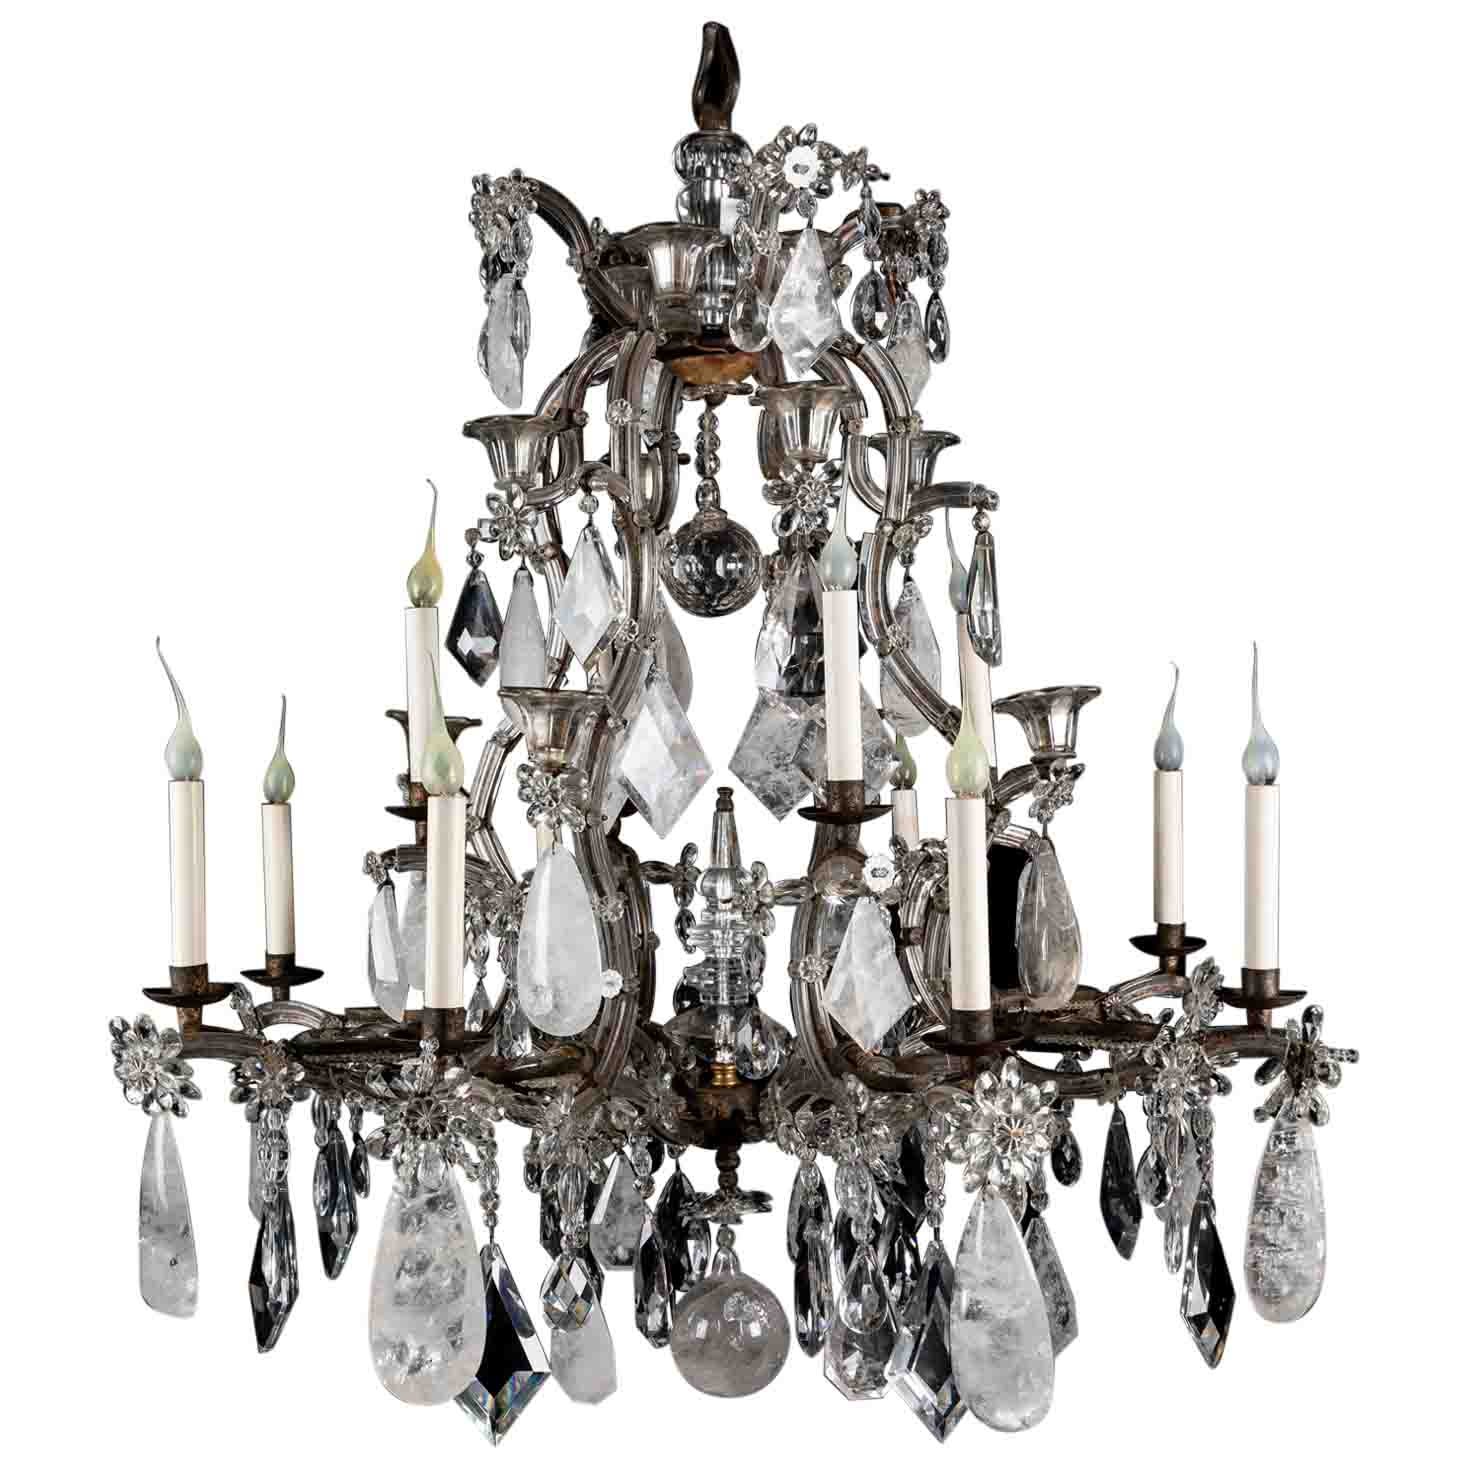 A Large Antique French Bagues Style Rock crystal and Iron Chandelier